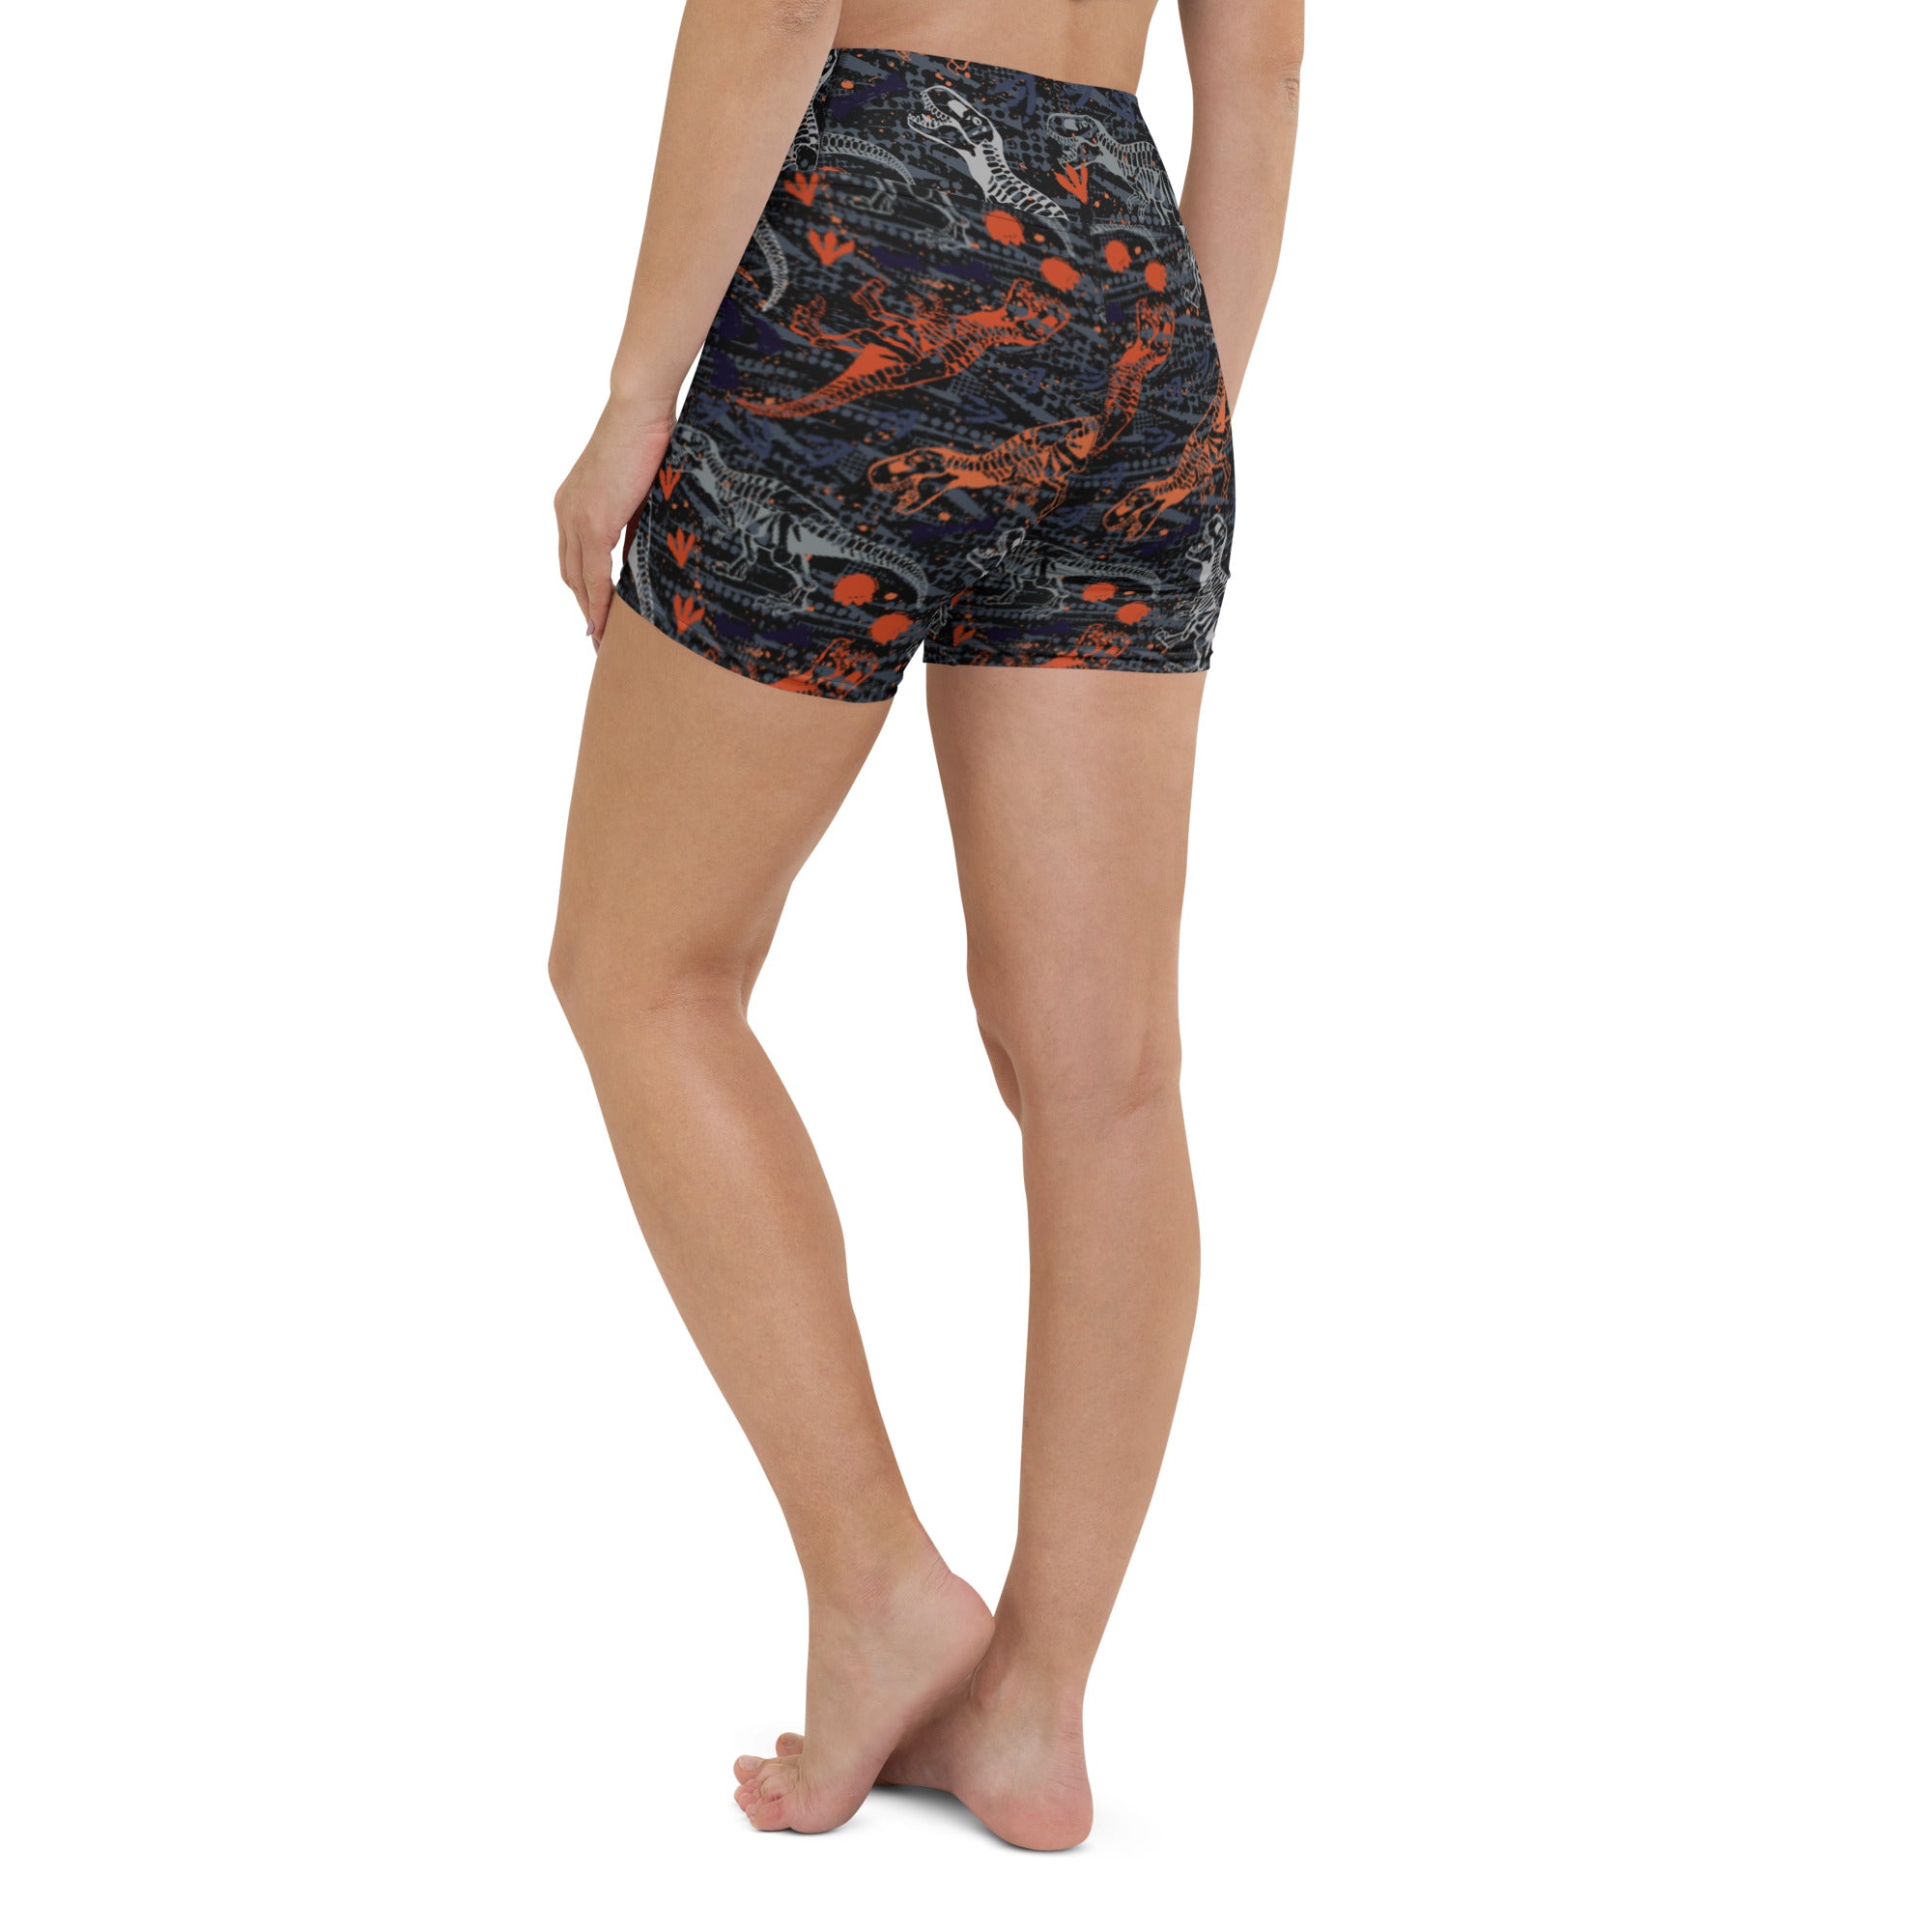 T-Wrecked Yoga Shorts, Athletic Shorts, - One Stop Rave